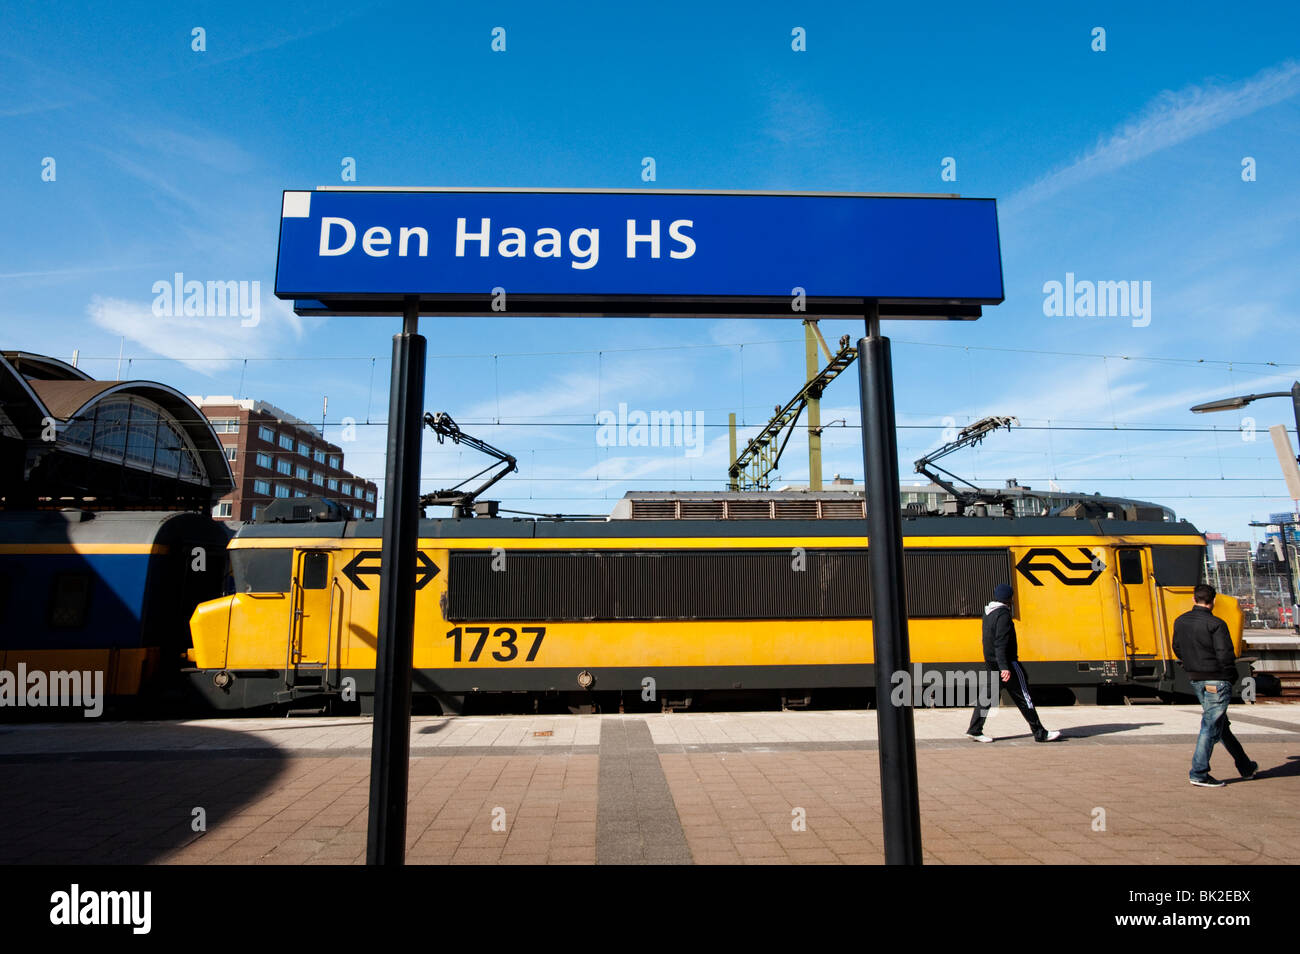 Train at Den Haag HS ( Holland Spoor) railway station in The Hague, The Netherlands Stock Photo